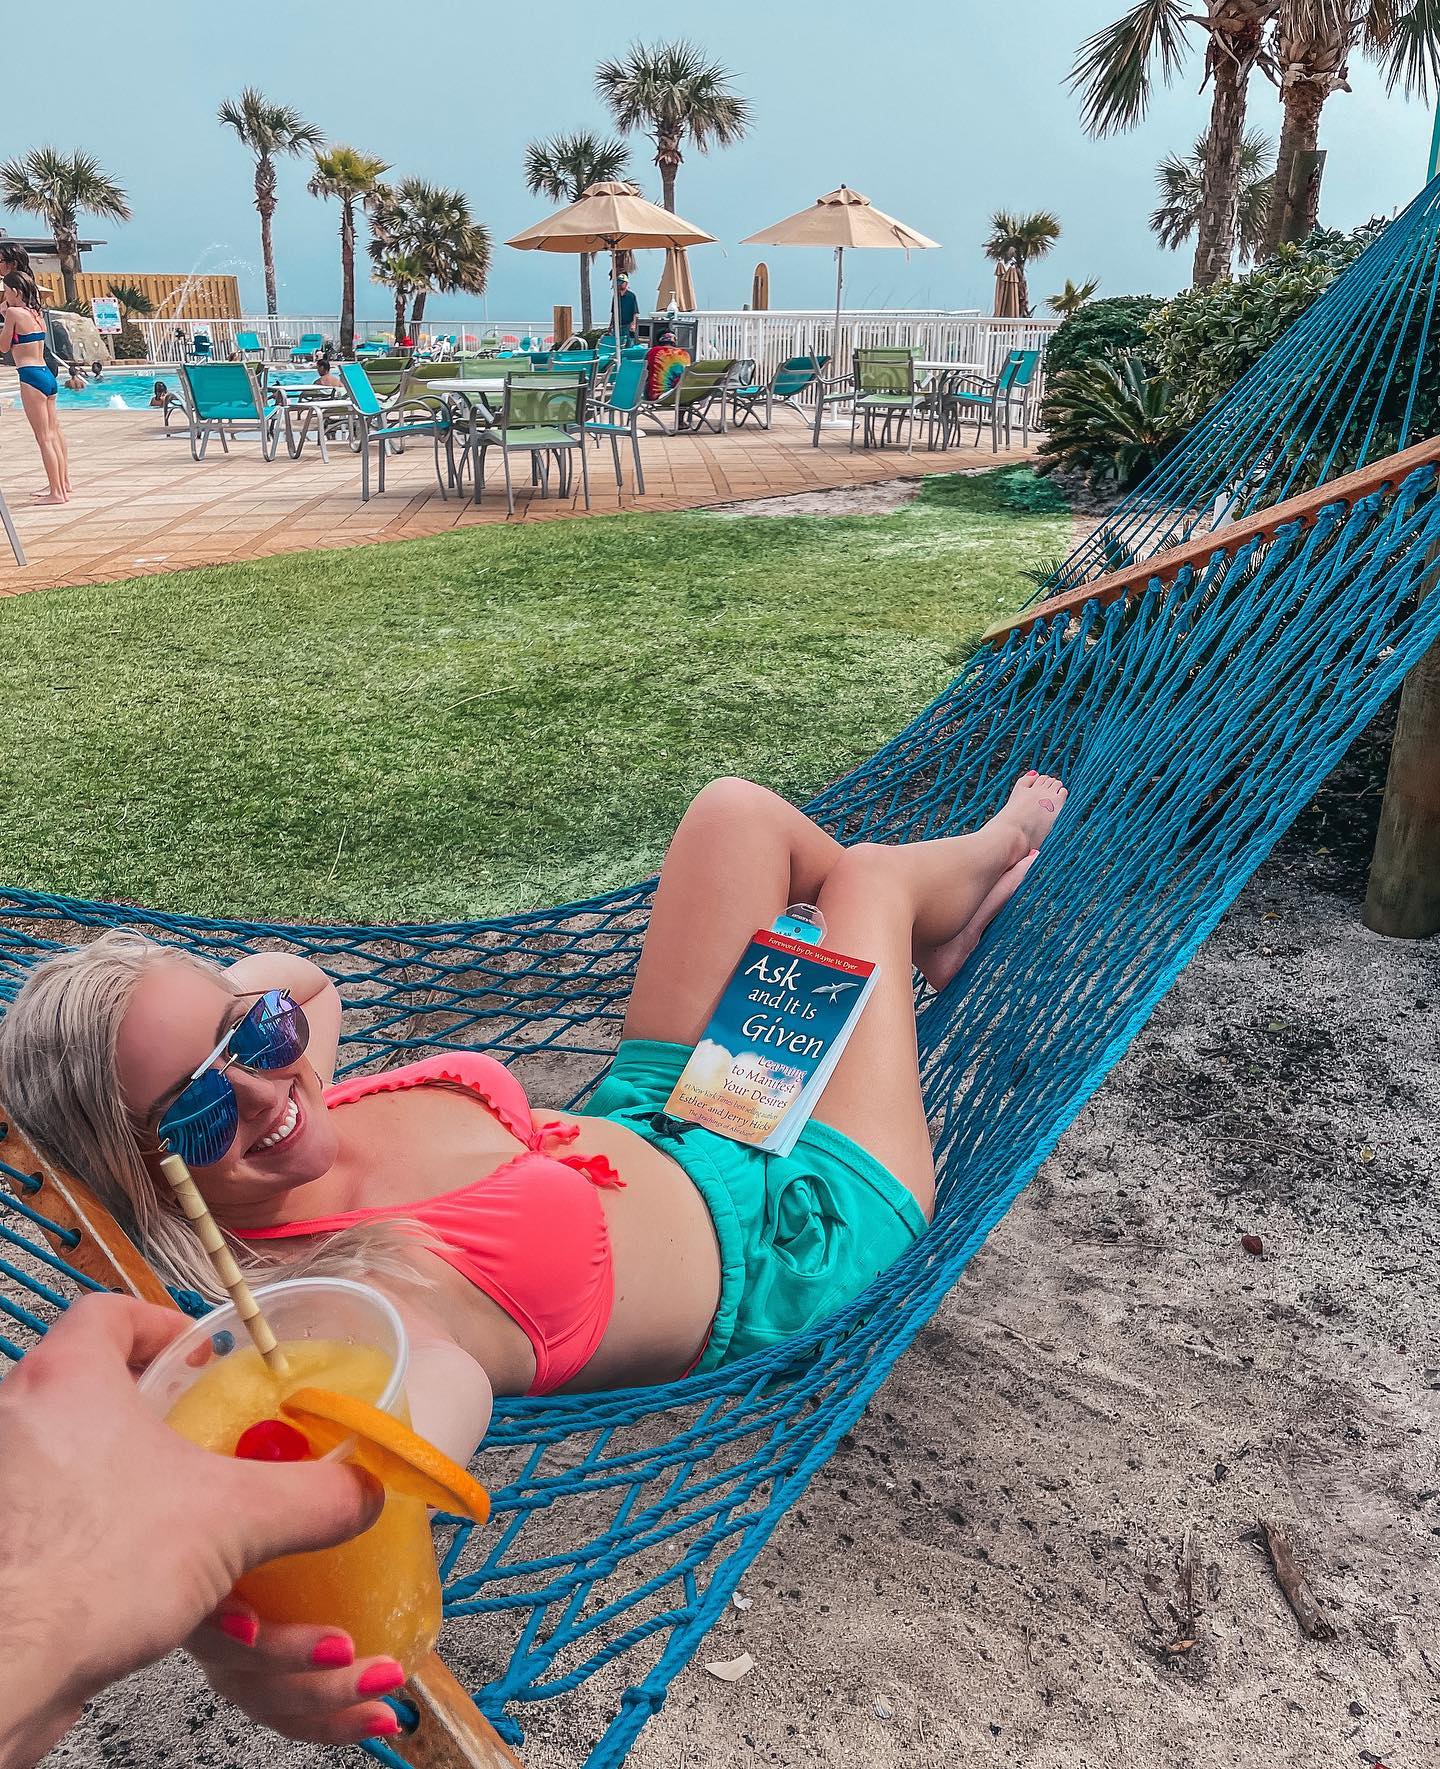 Enjoying the hammock at Holiday Inn Express Orange Beach while being handed a fun, orange drink. Most enjoyable things to do in Orange Beach.